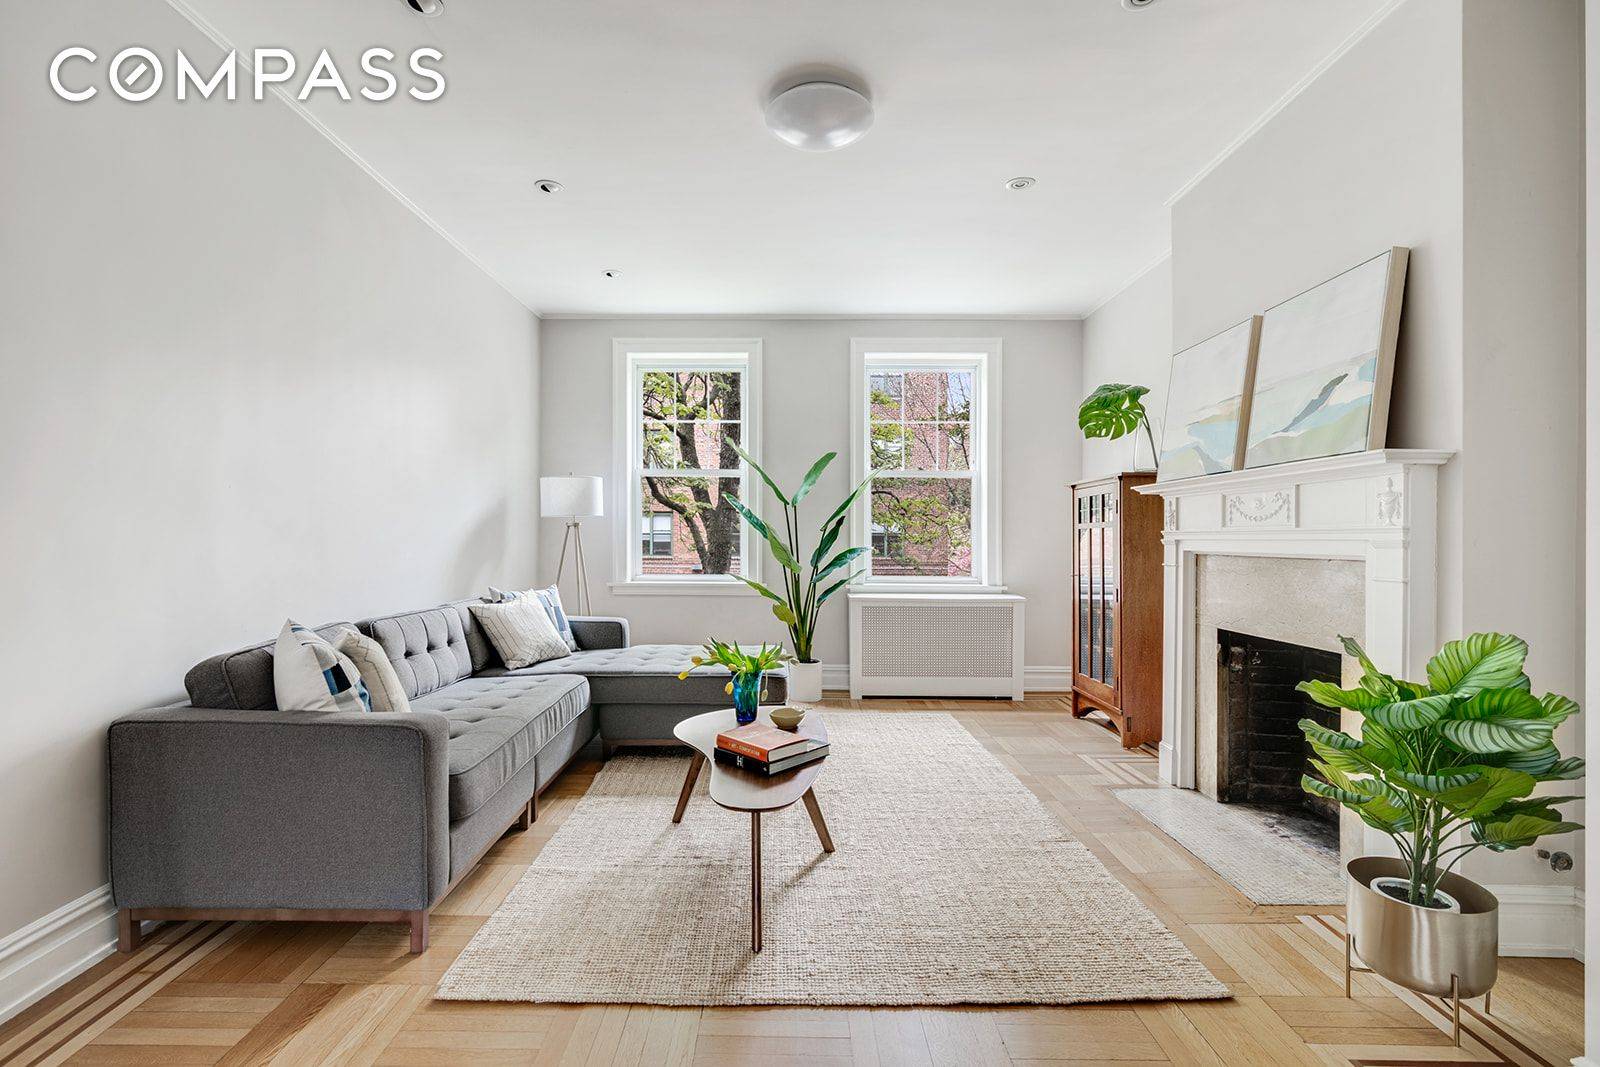 Historic charm meets modern living in this sophisticated 3 bed 2 bath architect designed and renovated Jackson Heights residence anyone would be proud to call their own !